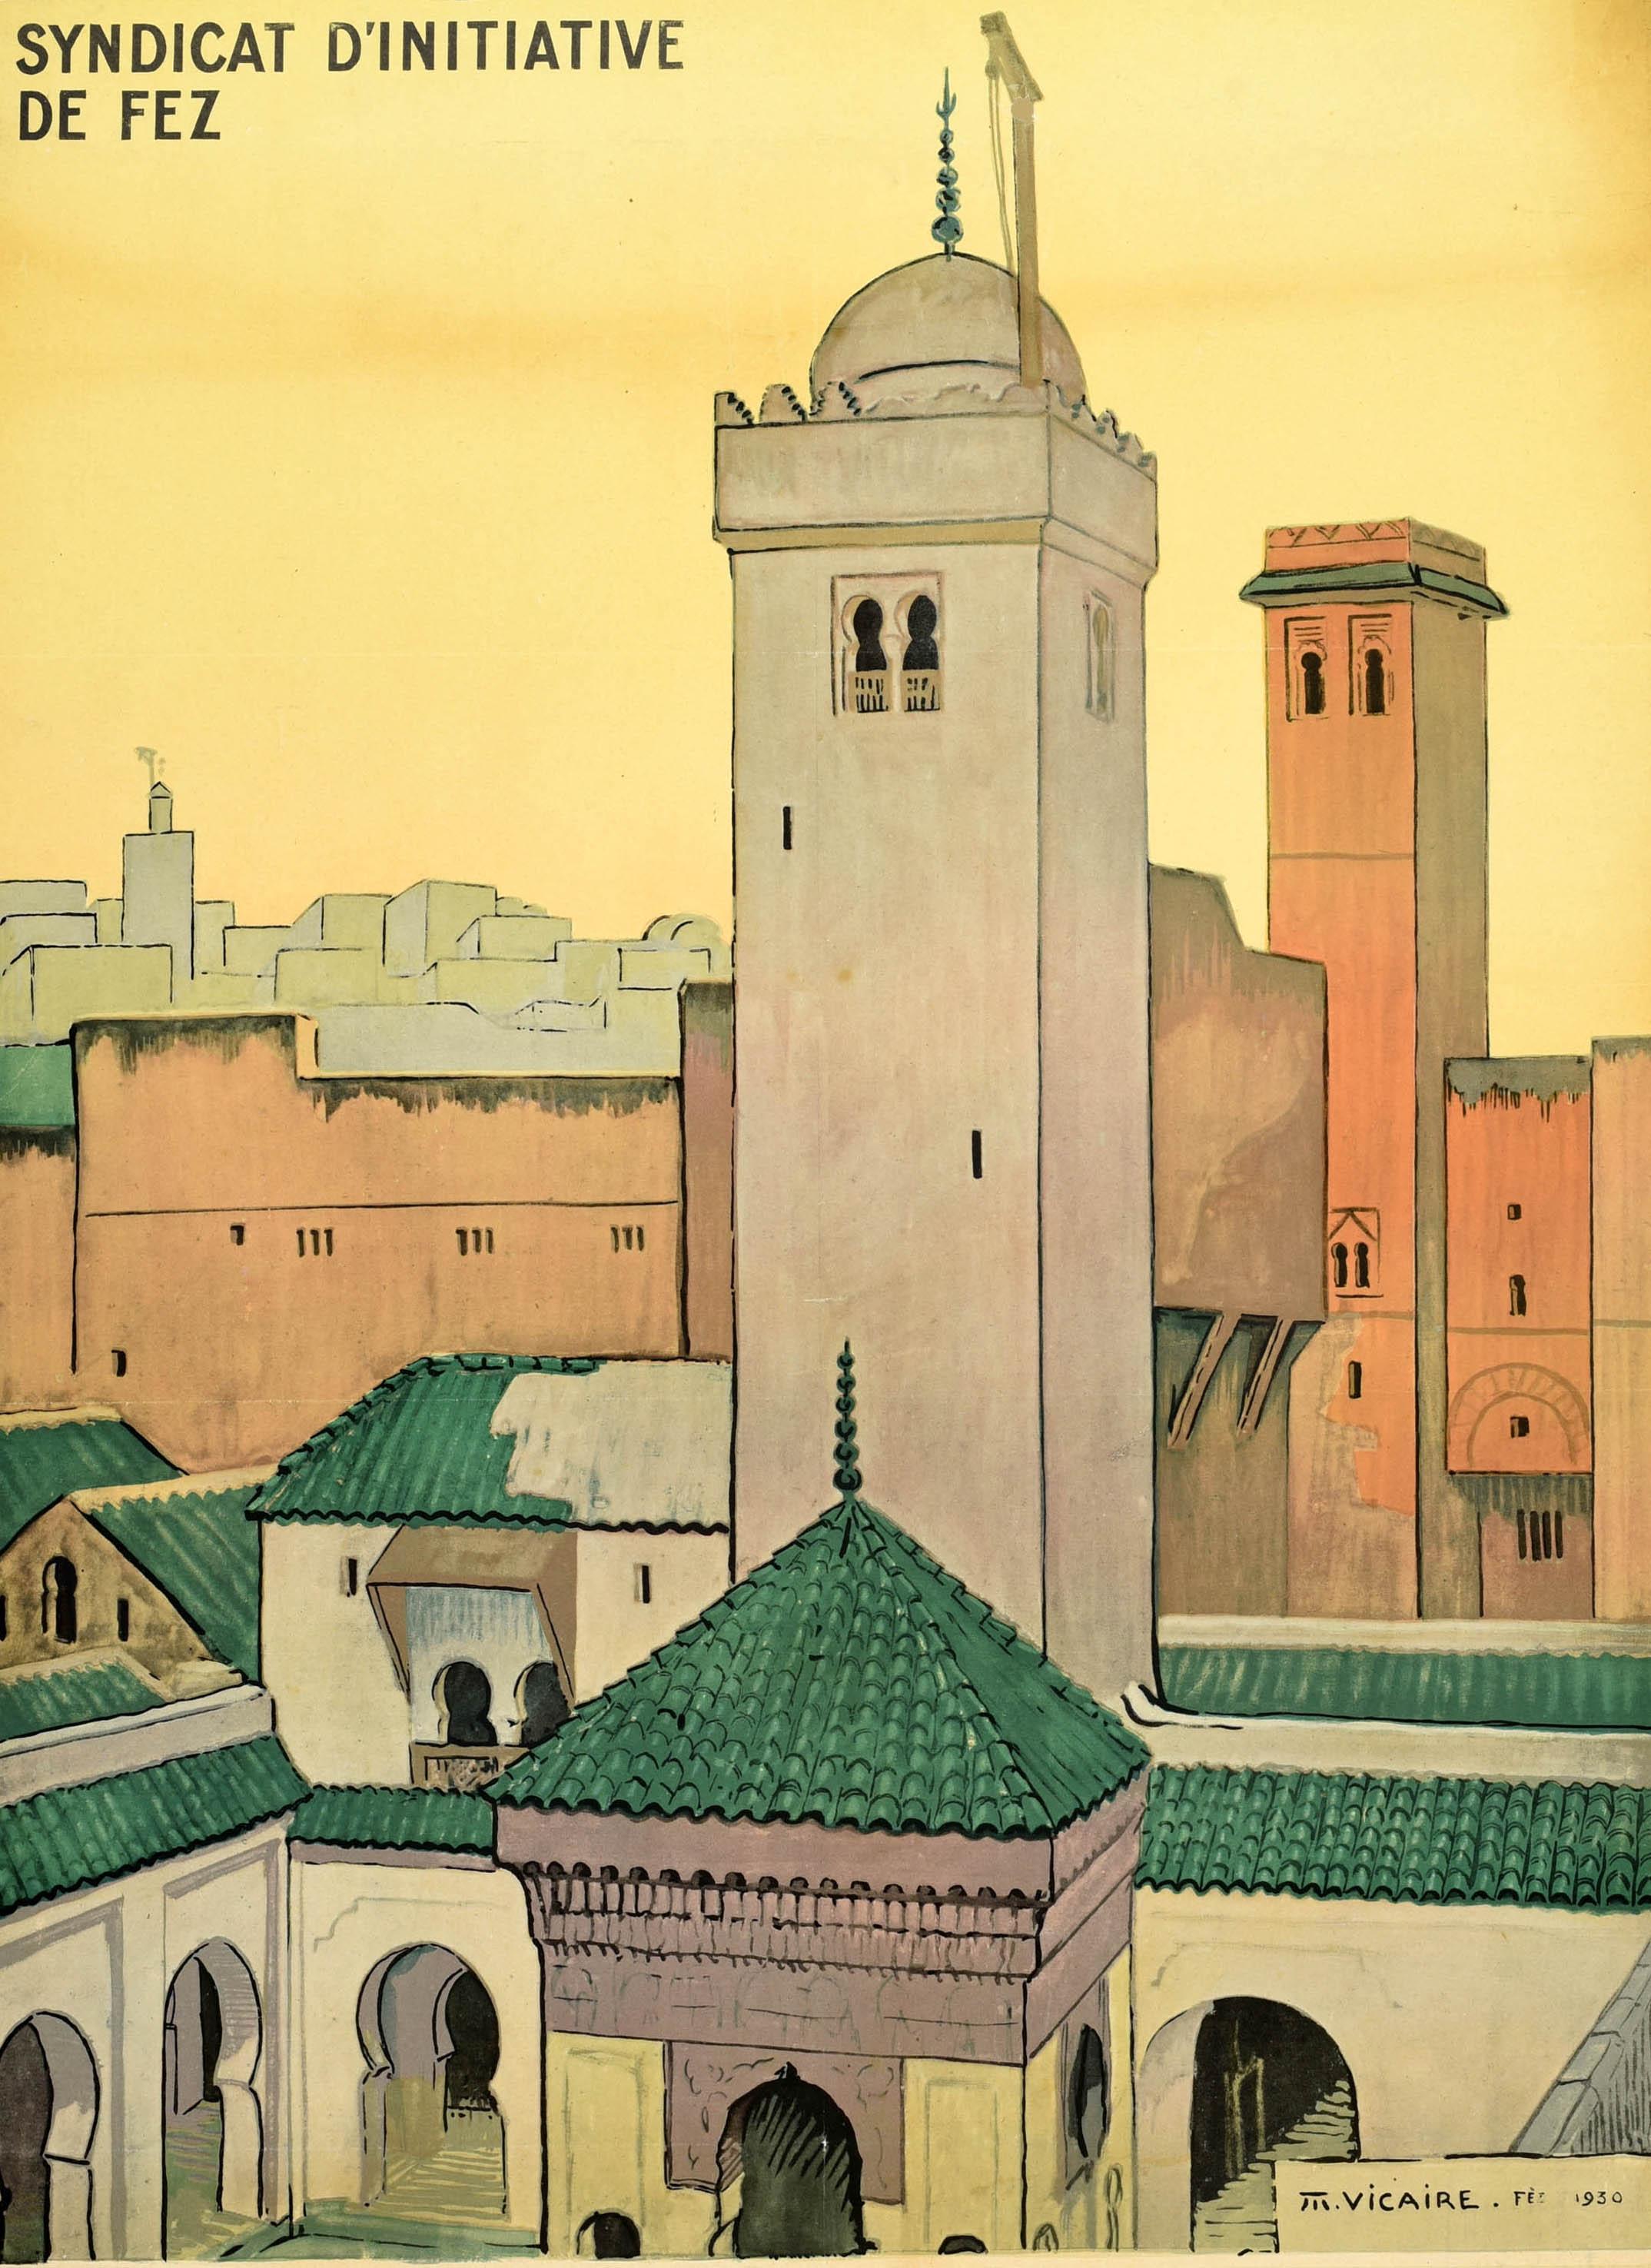 Original vintage travel poster for Fez in Morocco North Africa - Come and visit the mysterious Fez / Venez Visiter Fez la Mysterieuse - featuring a view over the city and historic University of al-Qarawiyyin with green roof tiles and arches around